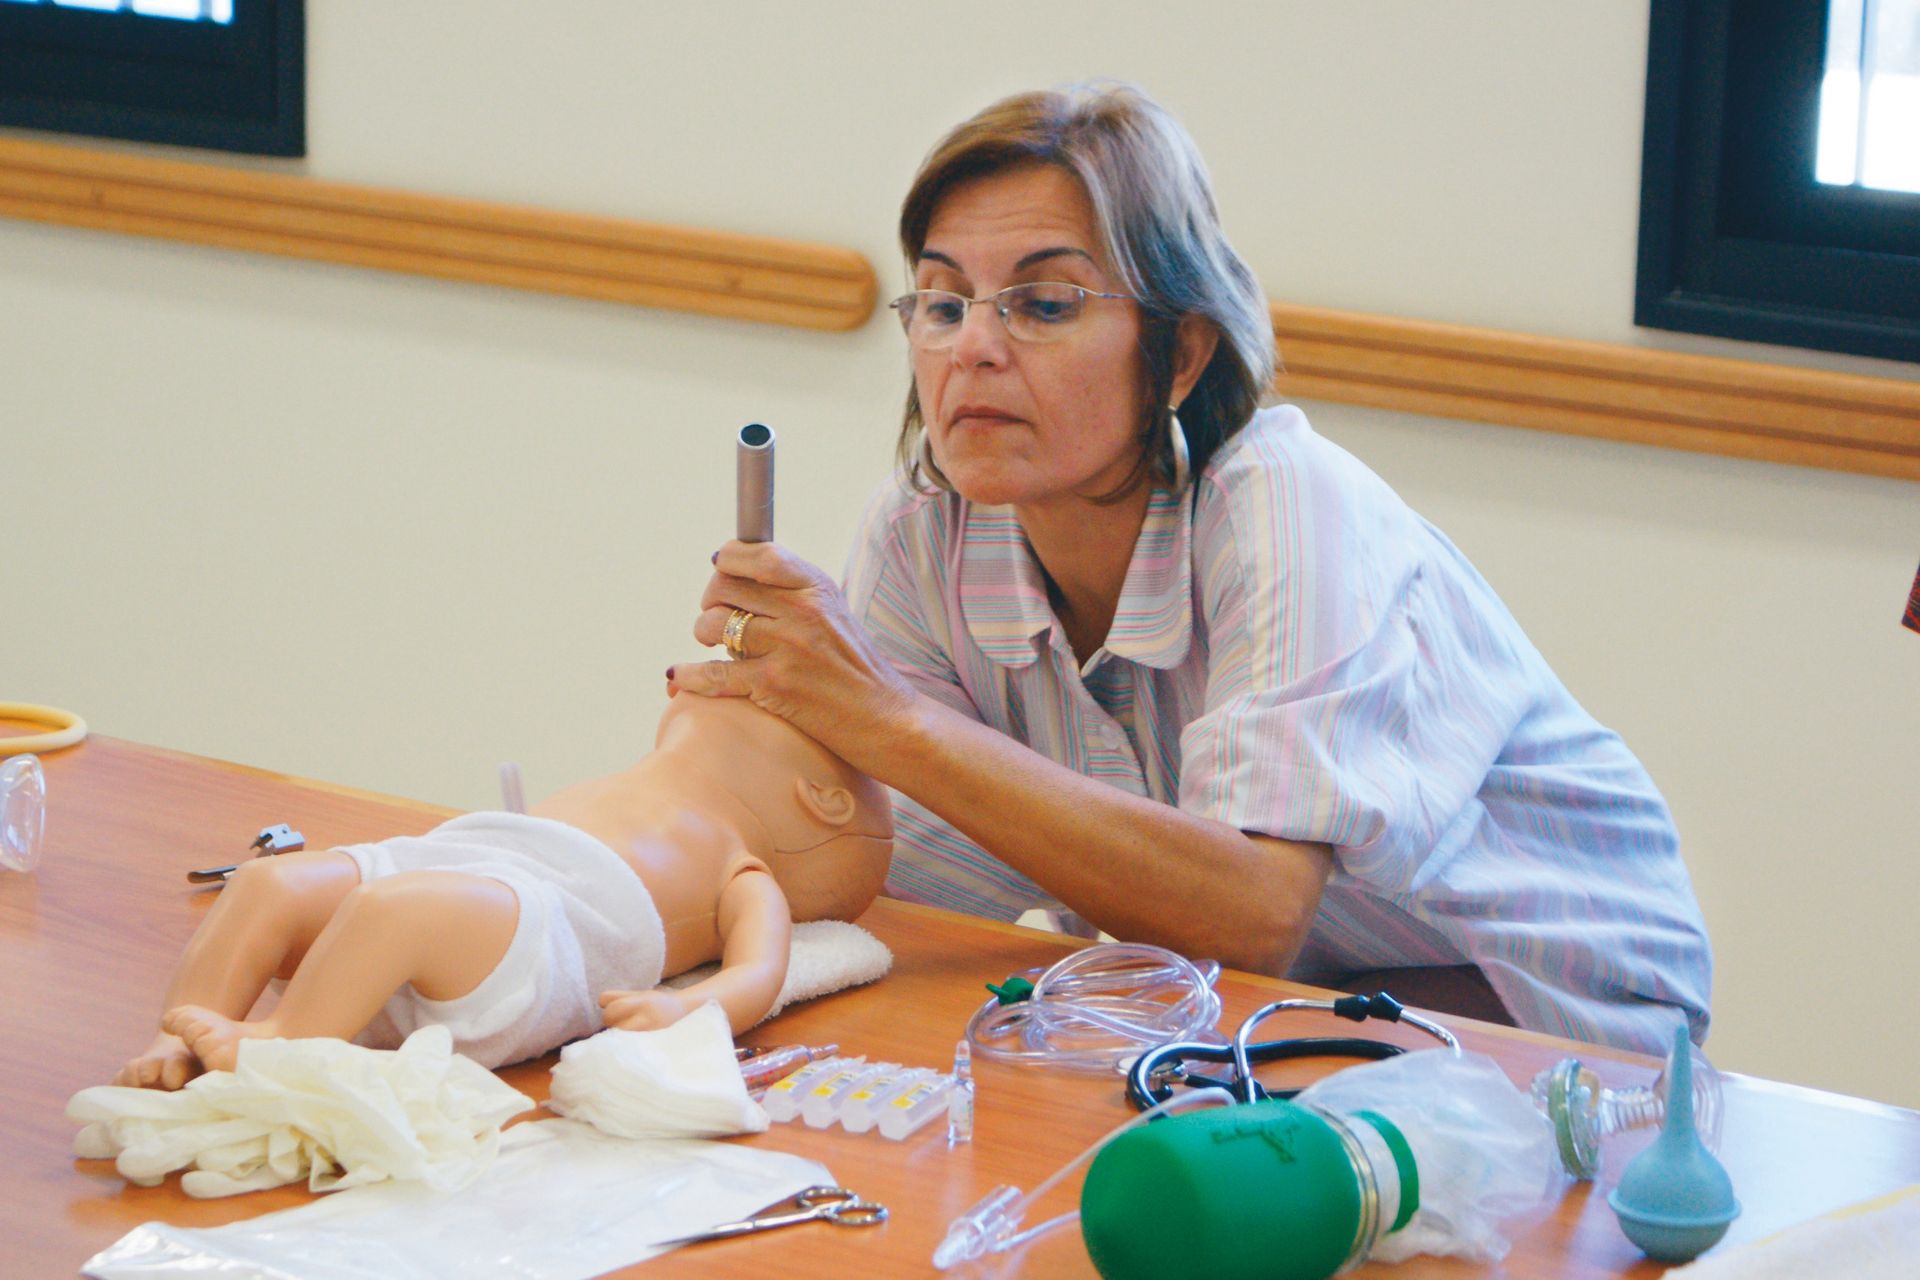 A woman at a table looking inside the mouth of a CPR practice baby at a welfare program workshop in Brazil.